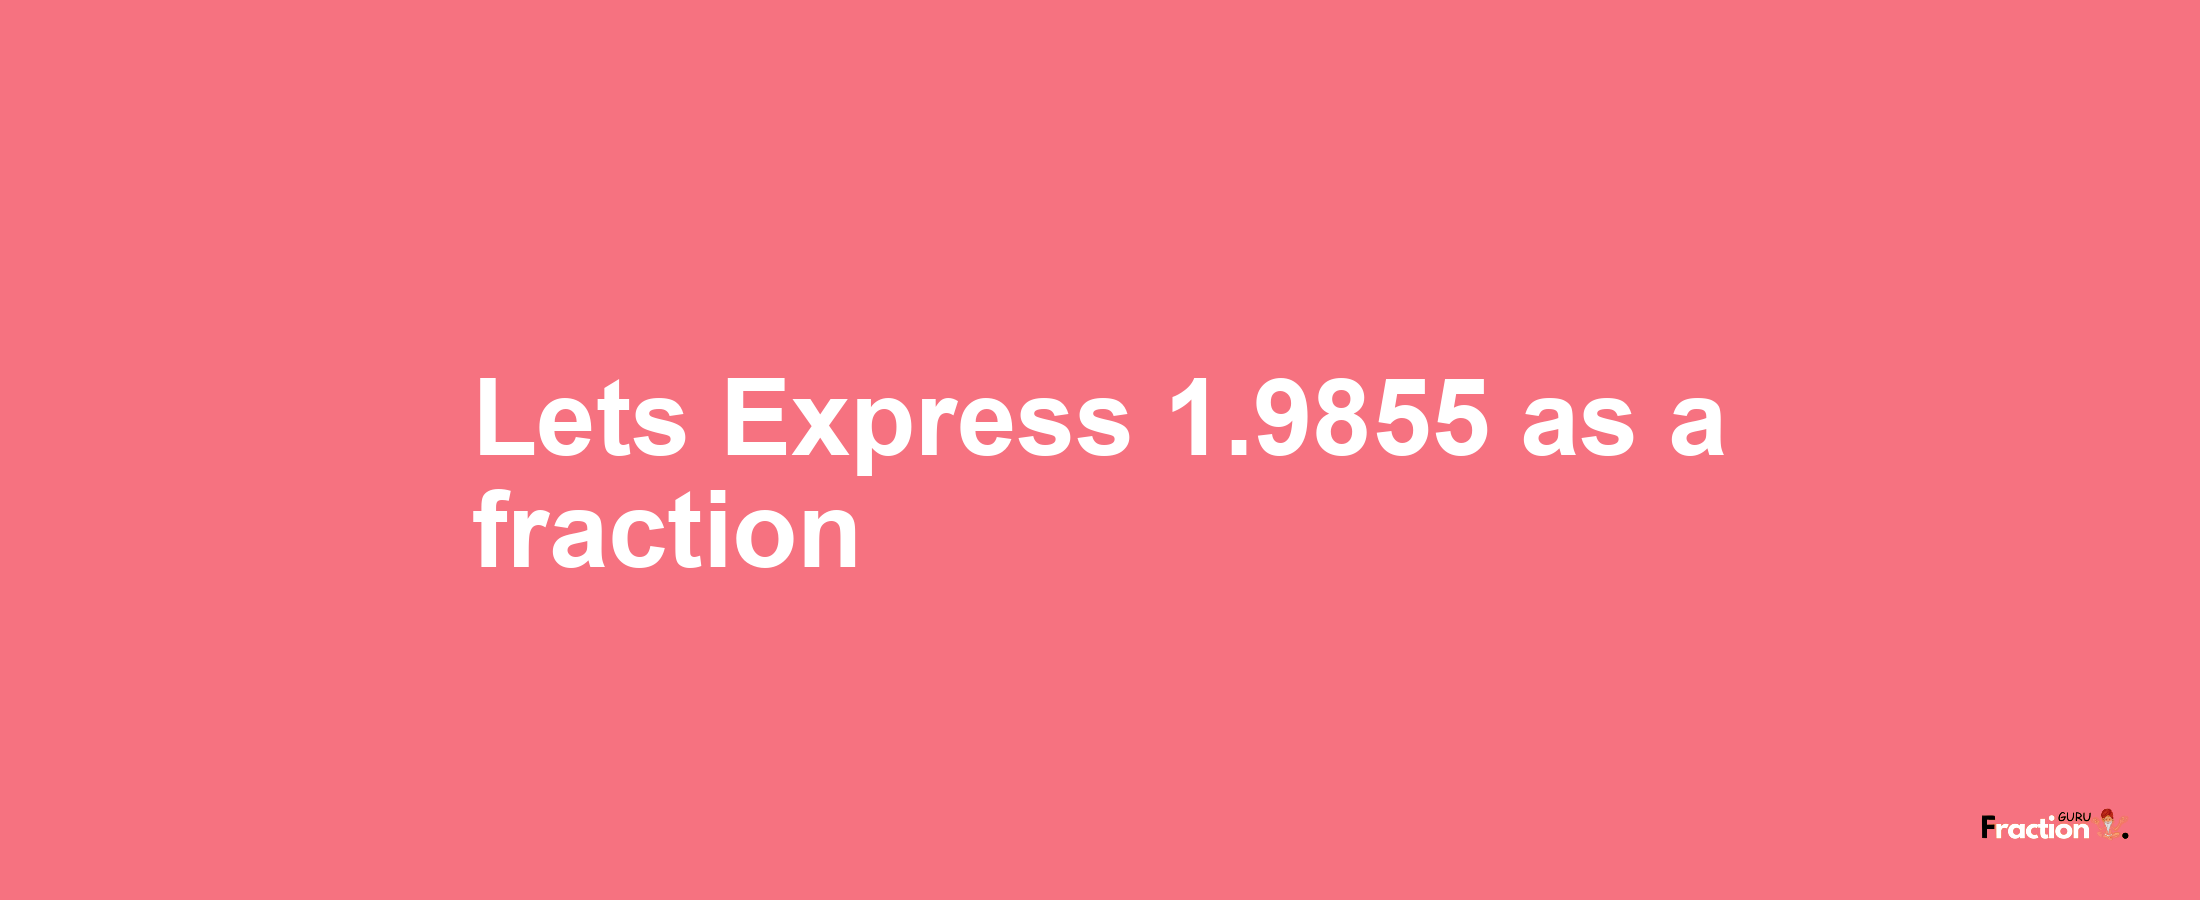 Lets Express 1.9855 as afraction